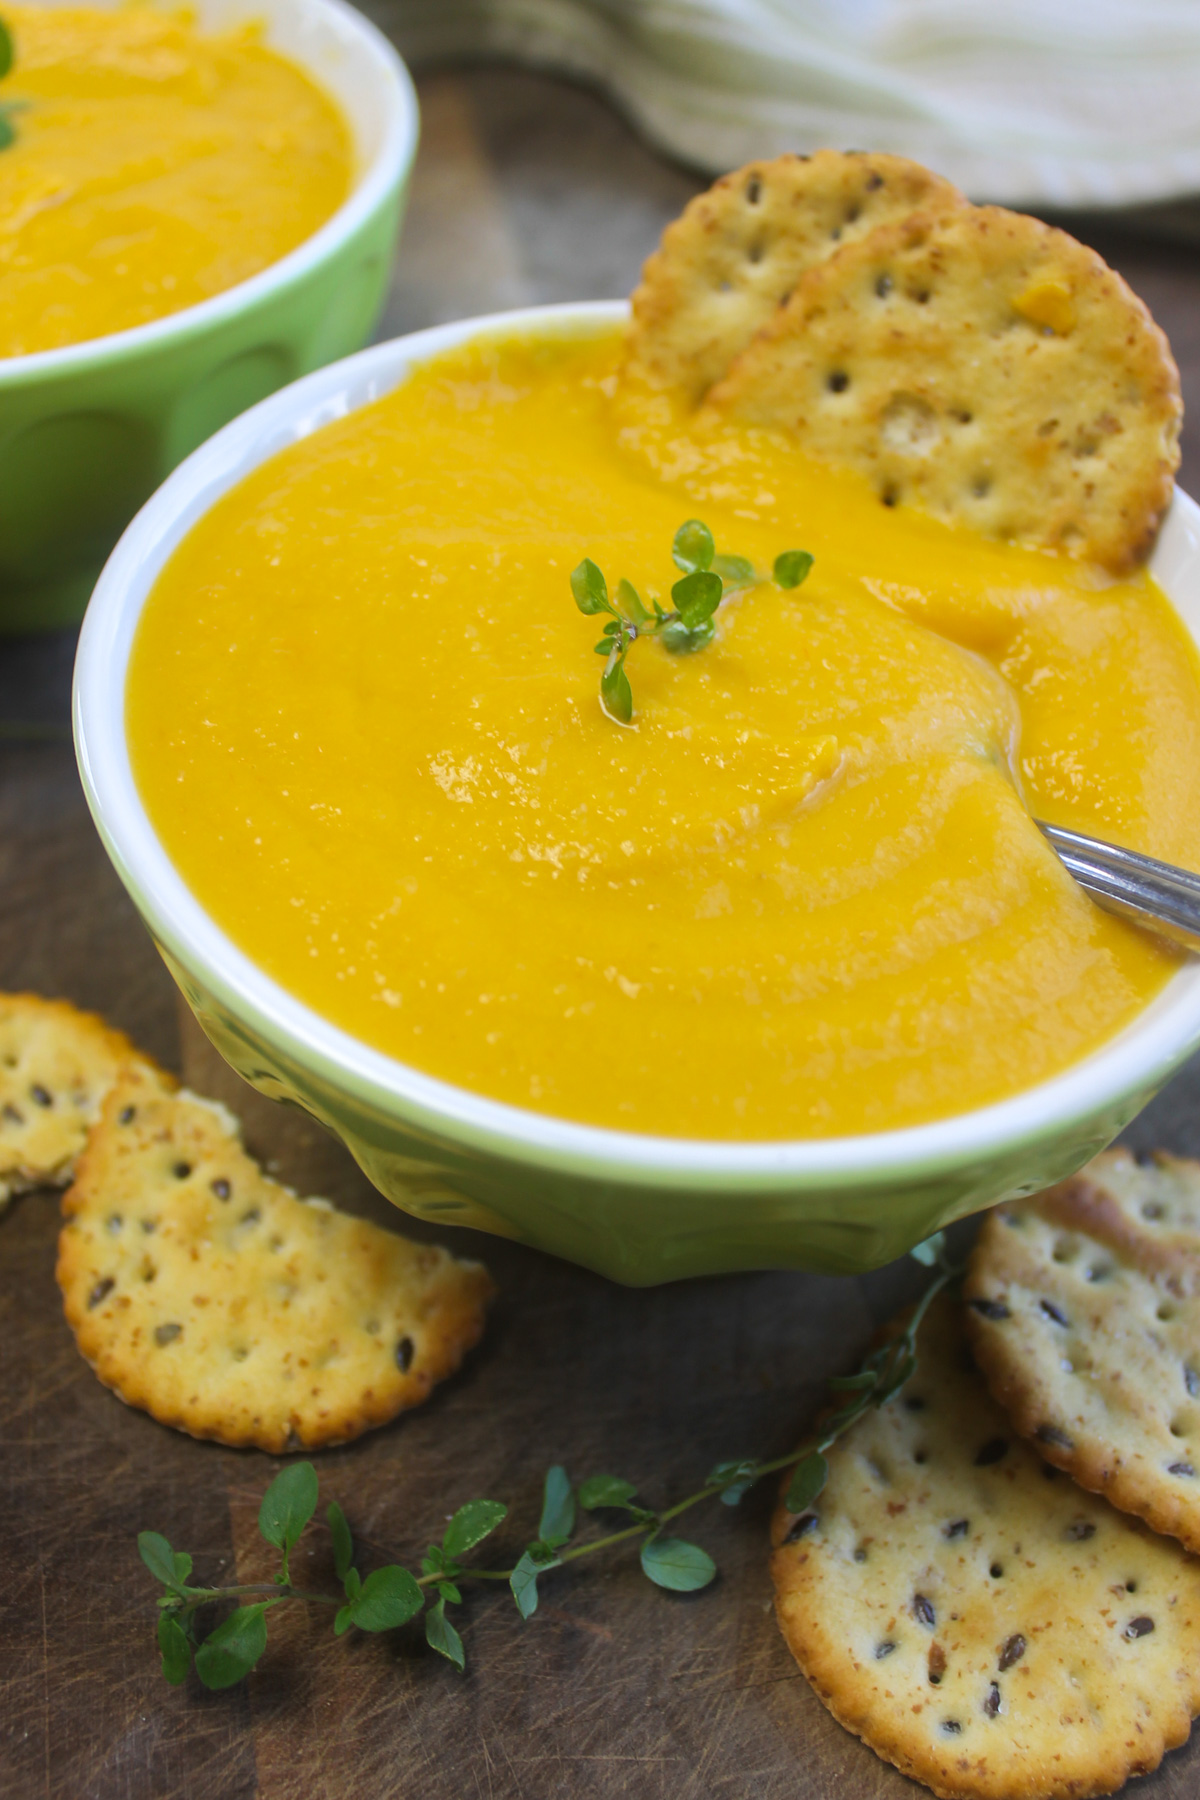 Butternut squash carrot soup with seedy crackers.